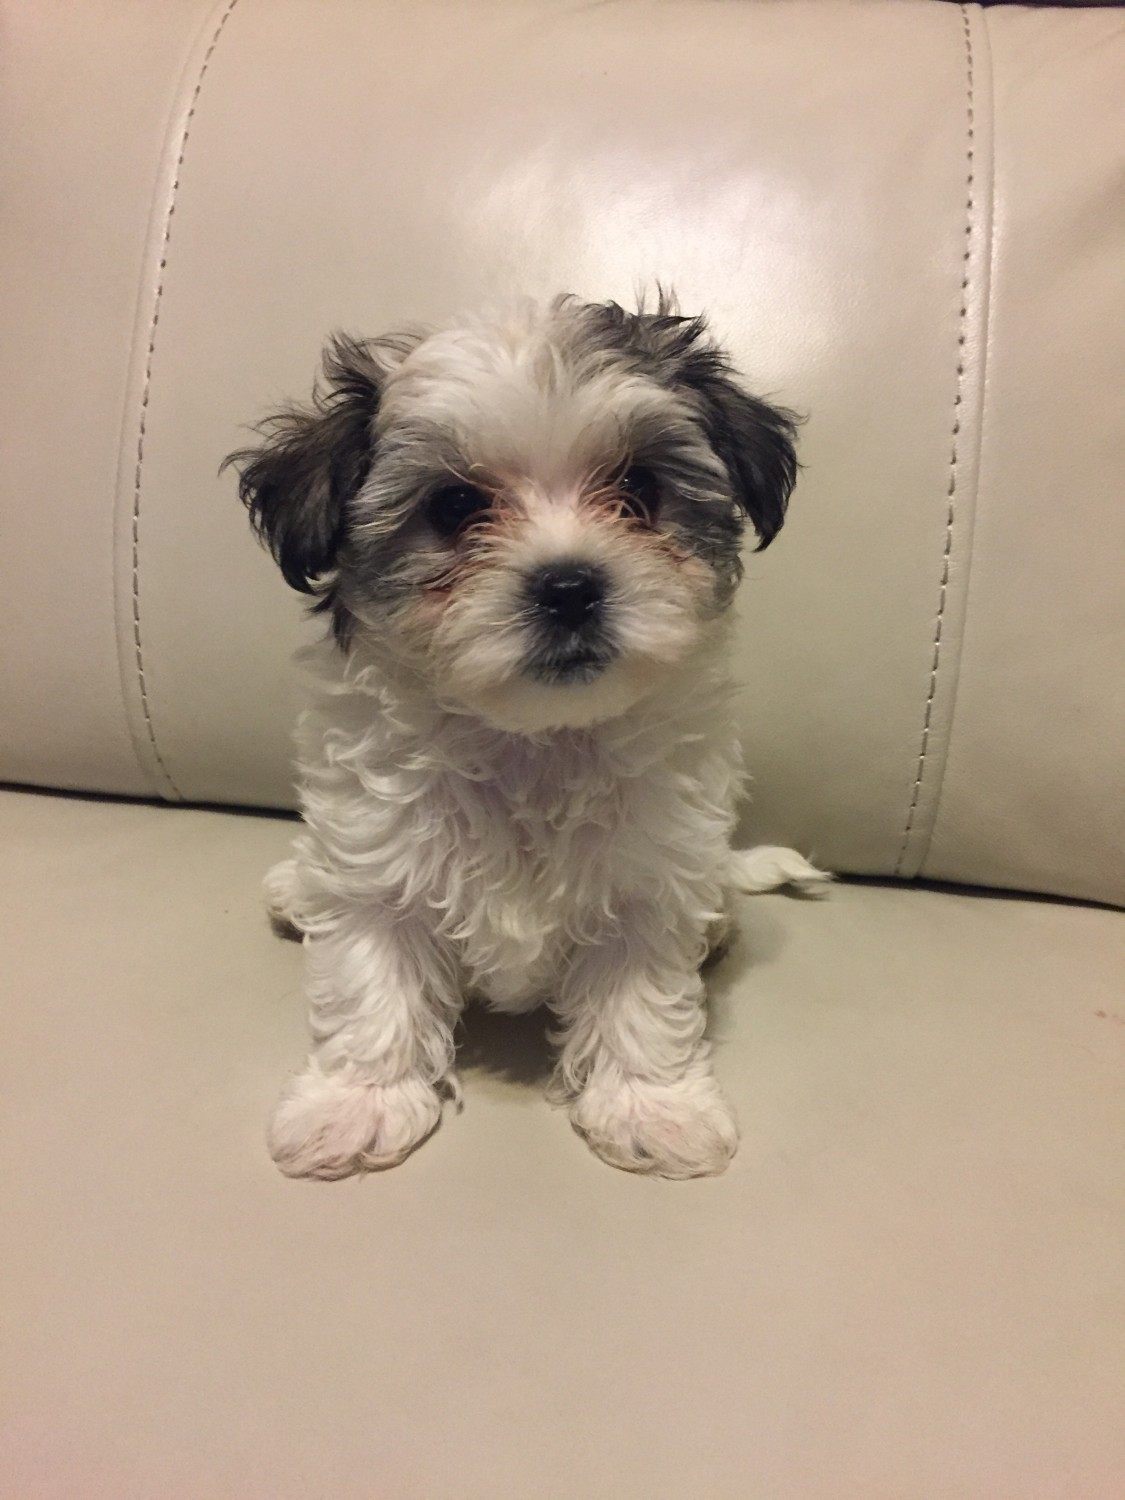 39 Top Photos Morkie Puppies For Sale In Florida : Morkie Puppies For Sale in Florida | Mix breed Yorkshire ...